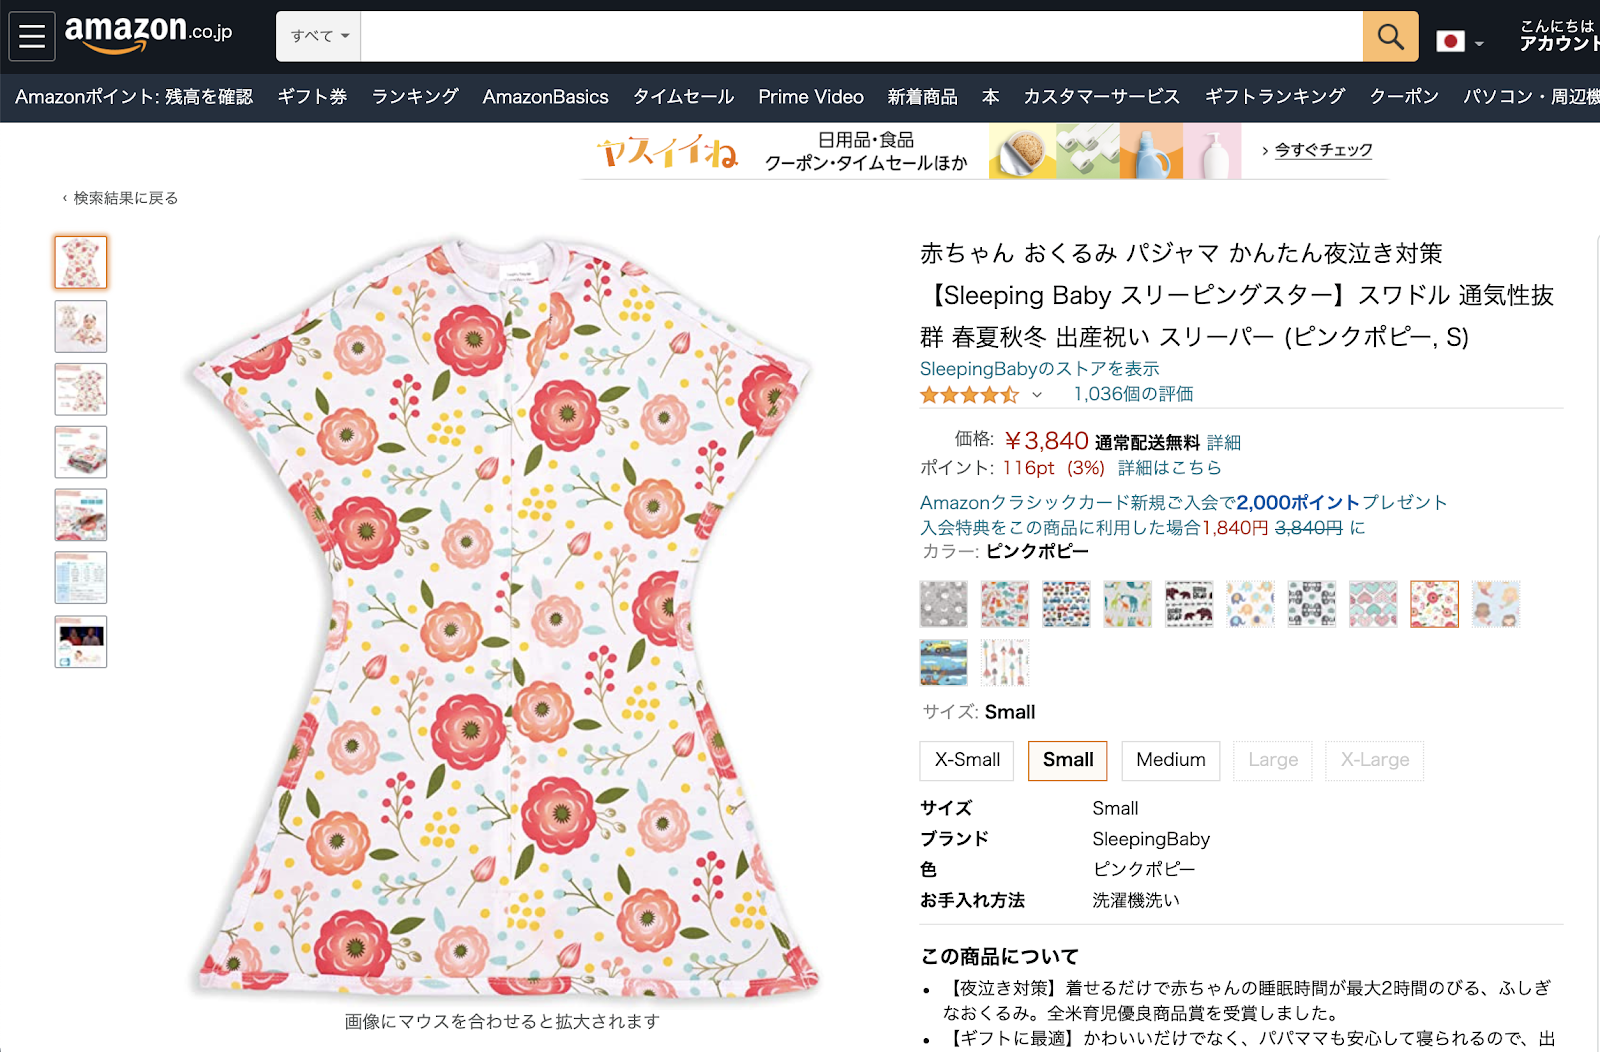 Humble Bunny case study for Sleeping Baby Japan e-commerce Amazon product page